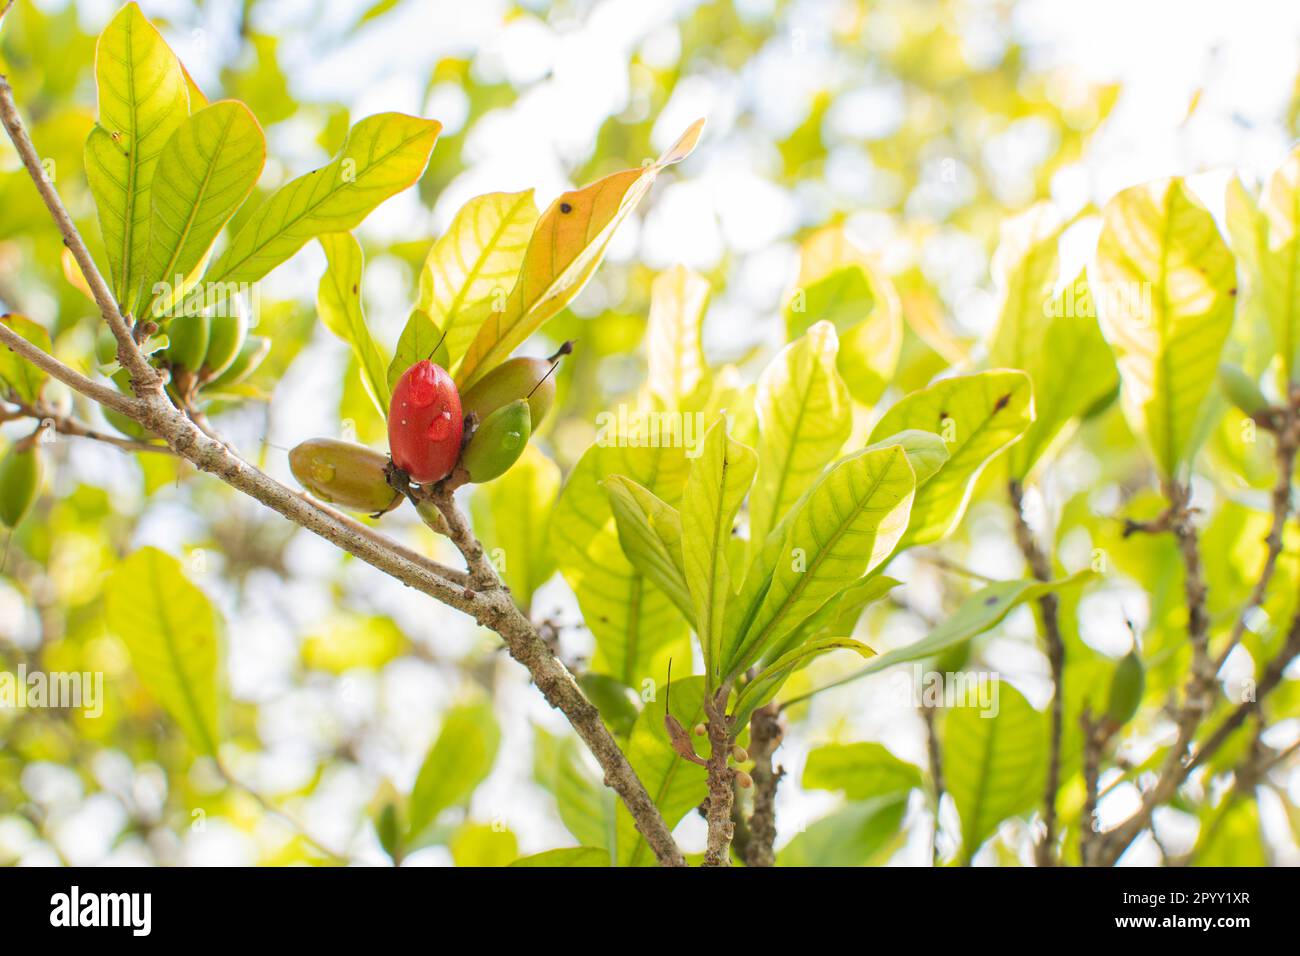 Synsepalum dulcificum. miracle fruit, miracle berry, miraculous berry, sweet berry. Tropical fruits growing on a branch. The fruit changes the sour ta Stock Photo